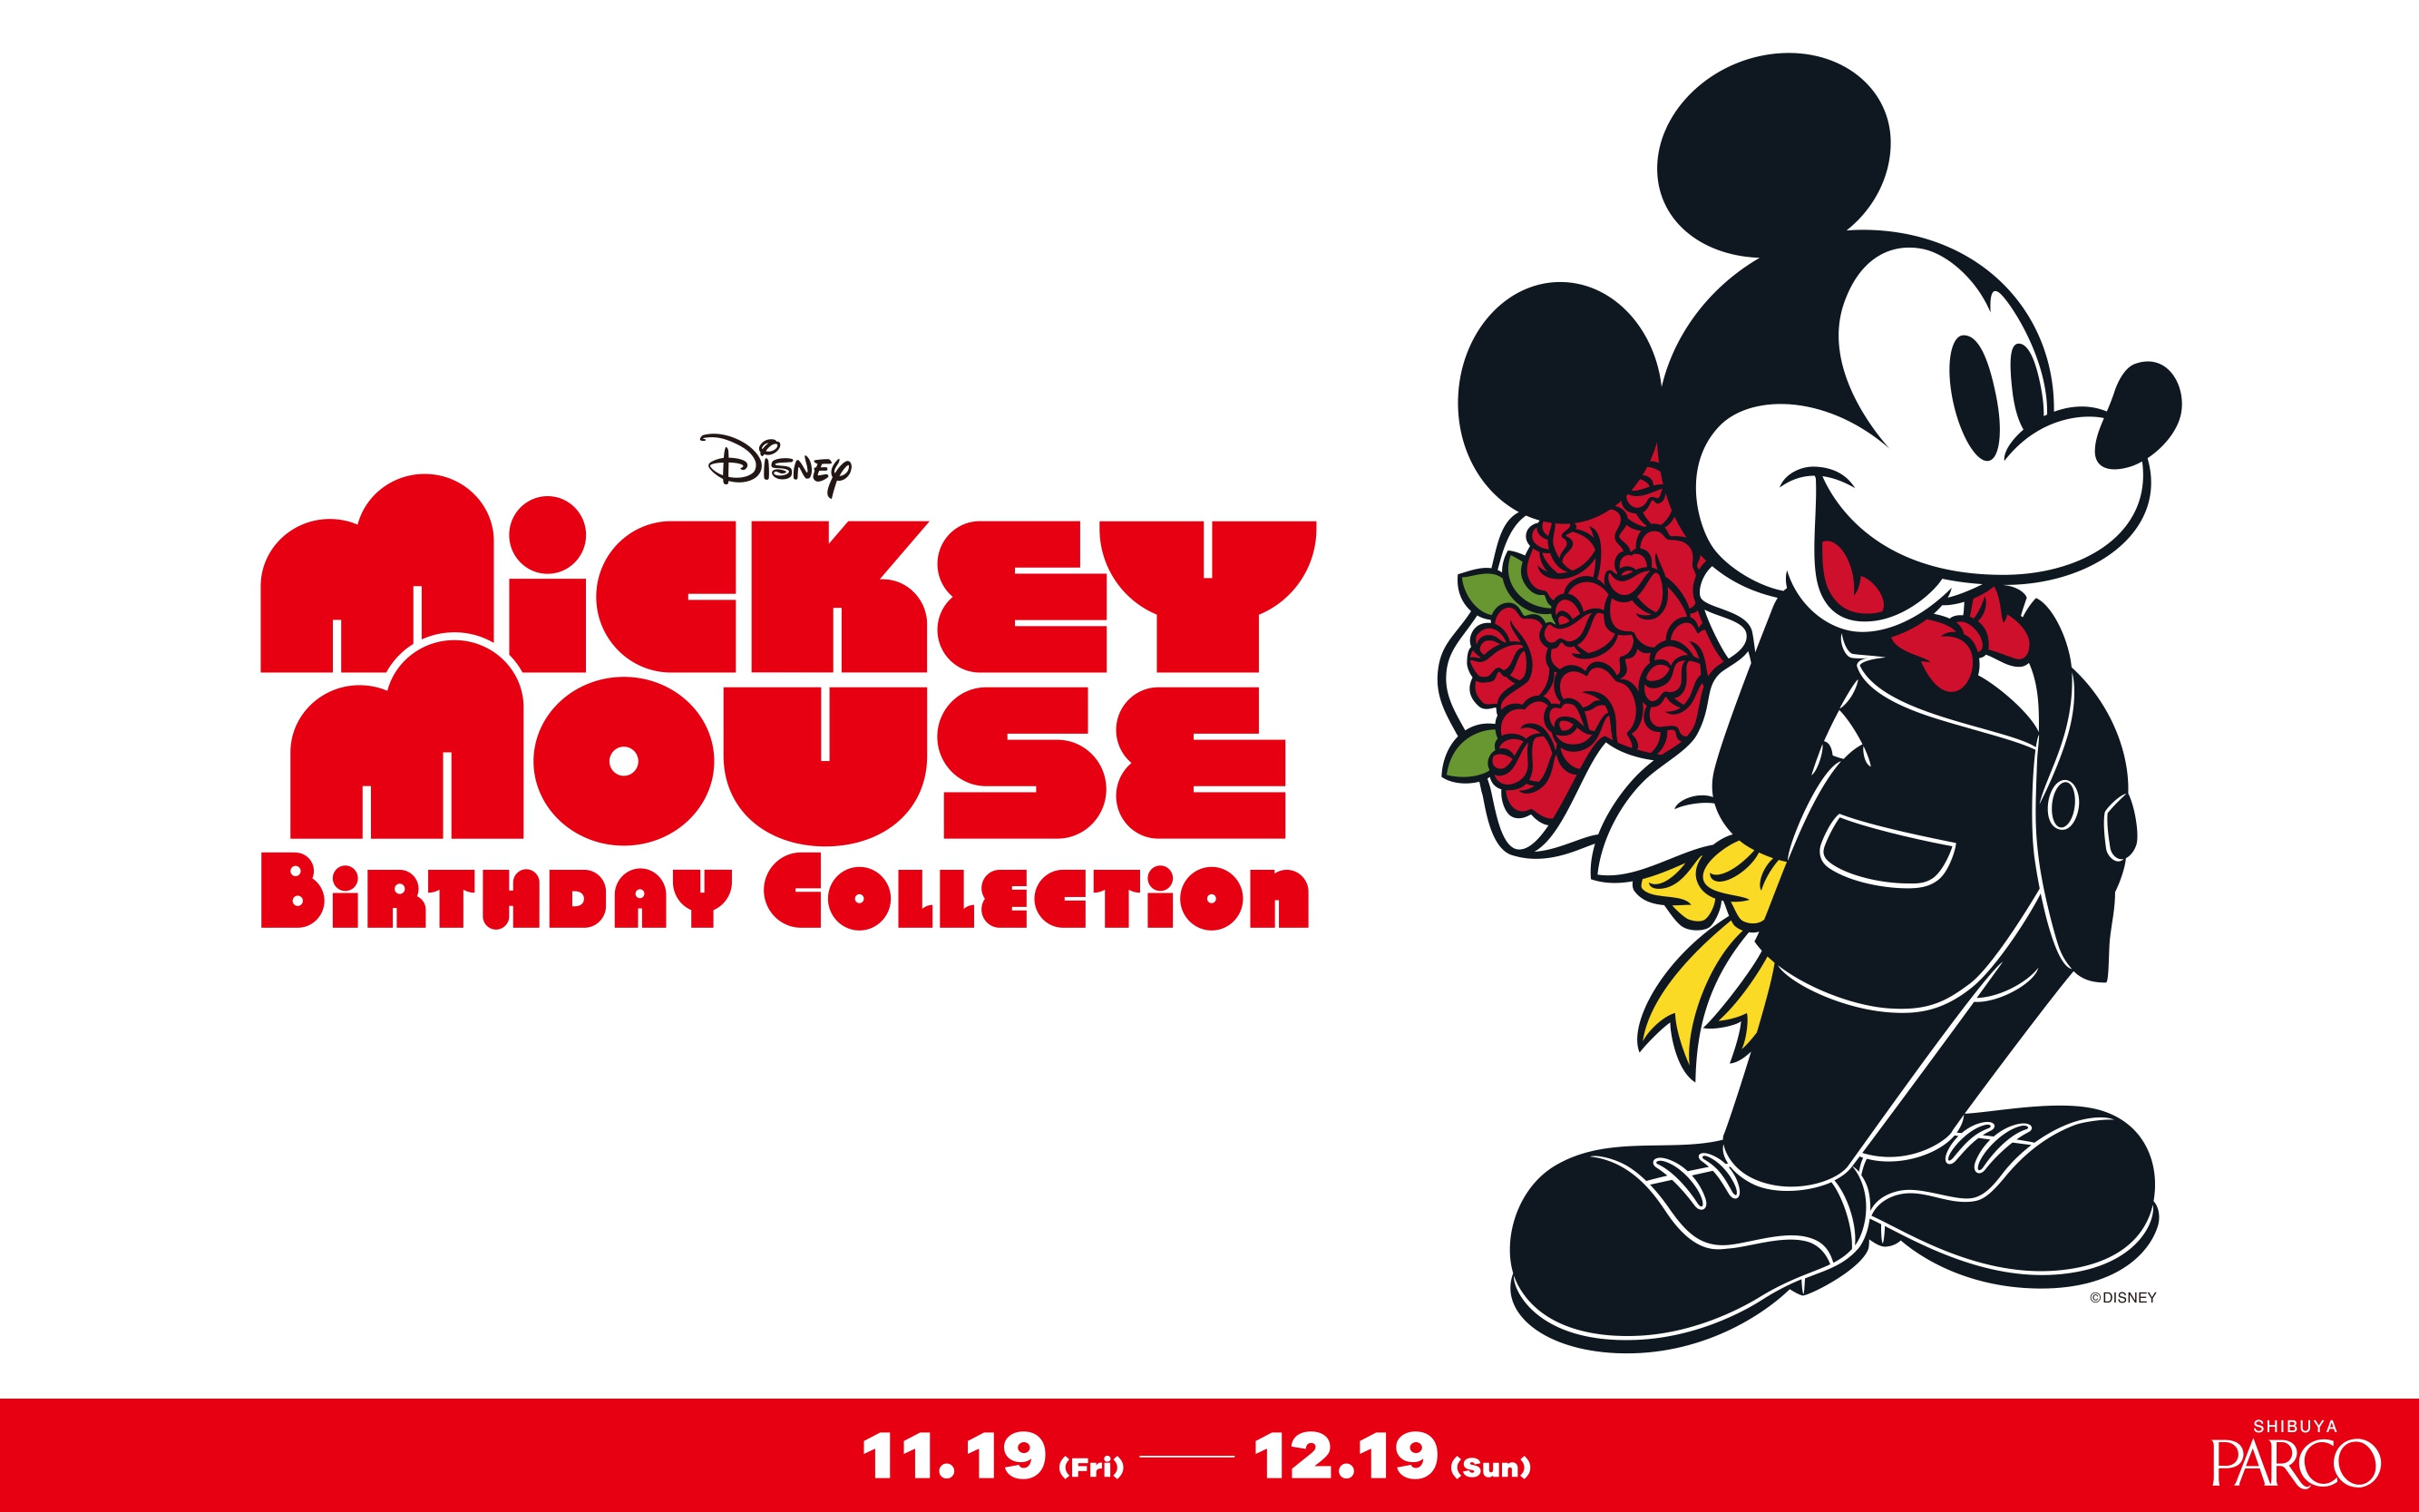 Mickey Mouse Birthday Collection」渋谷PARCOにて初開催！｜株式会社 